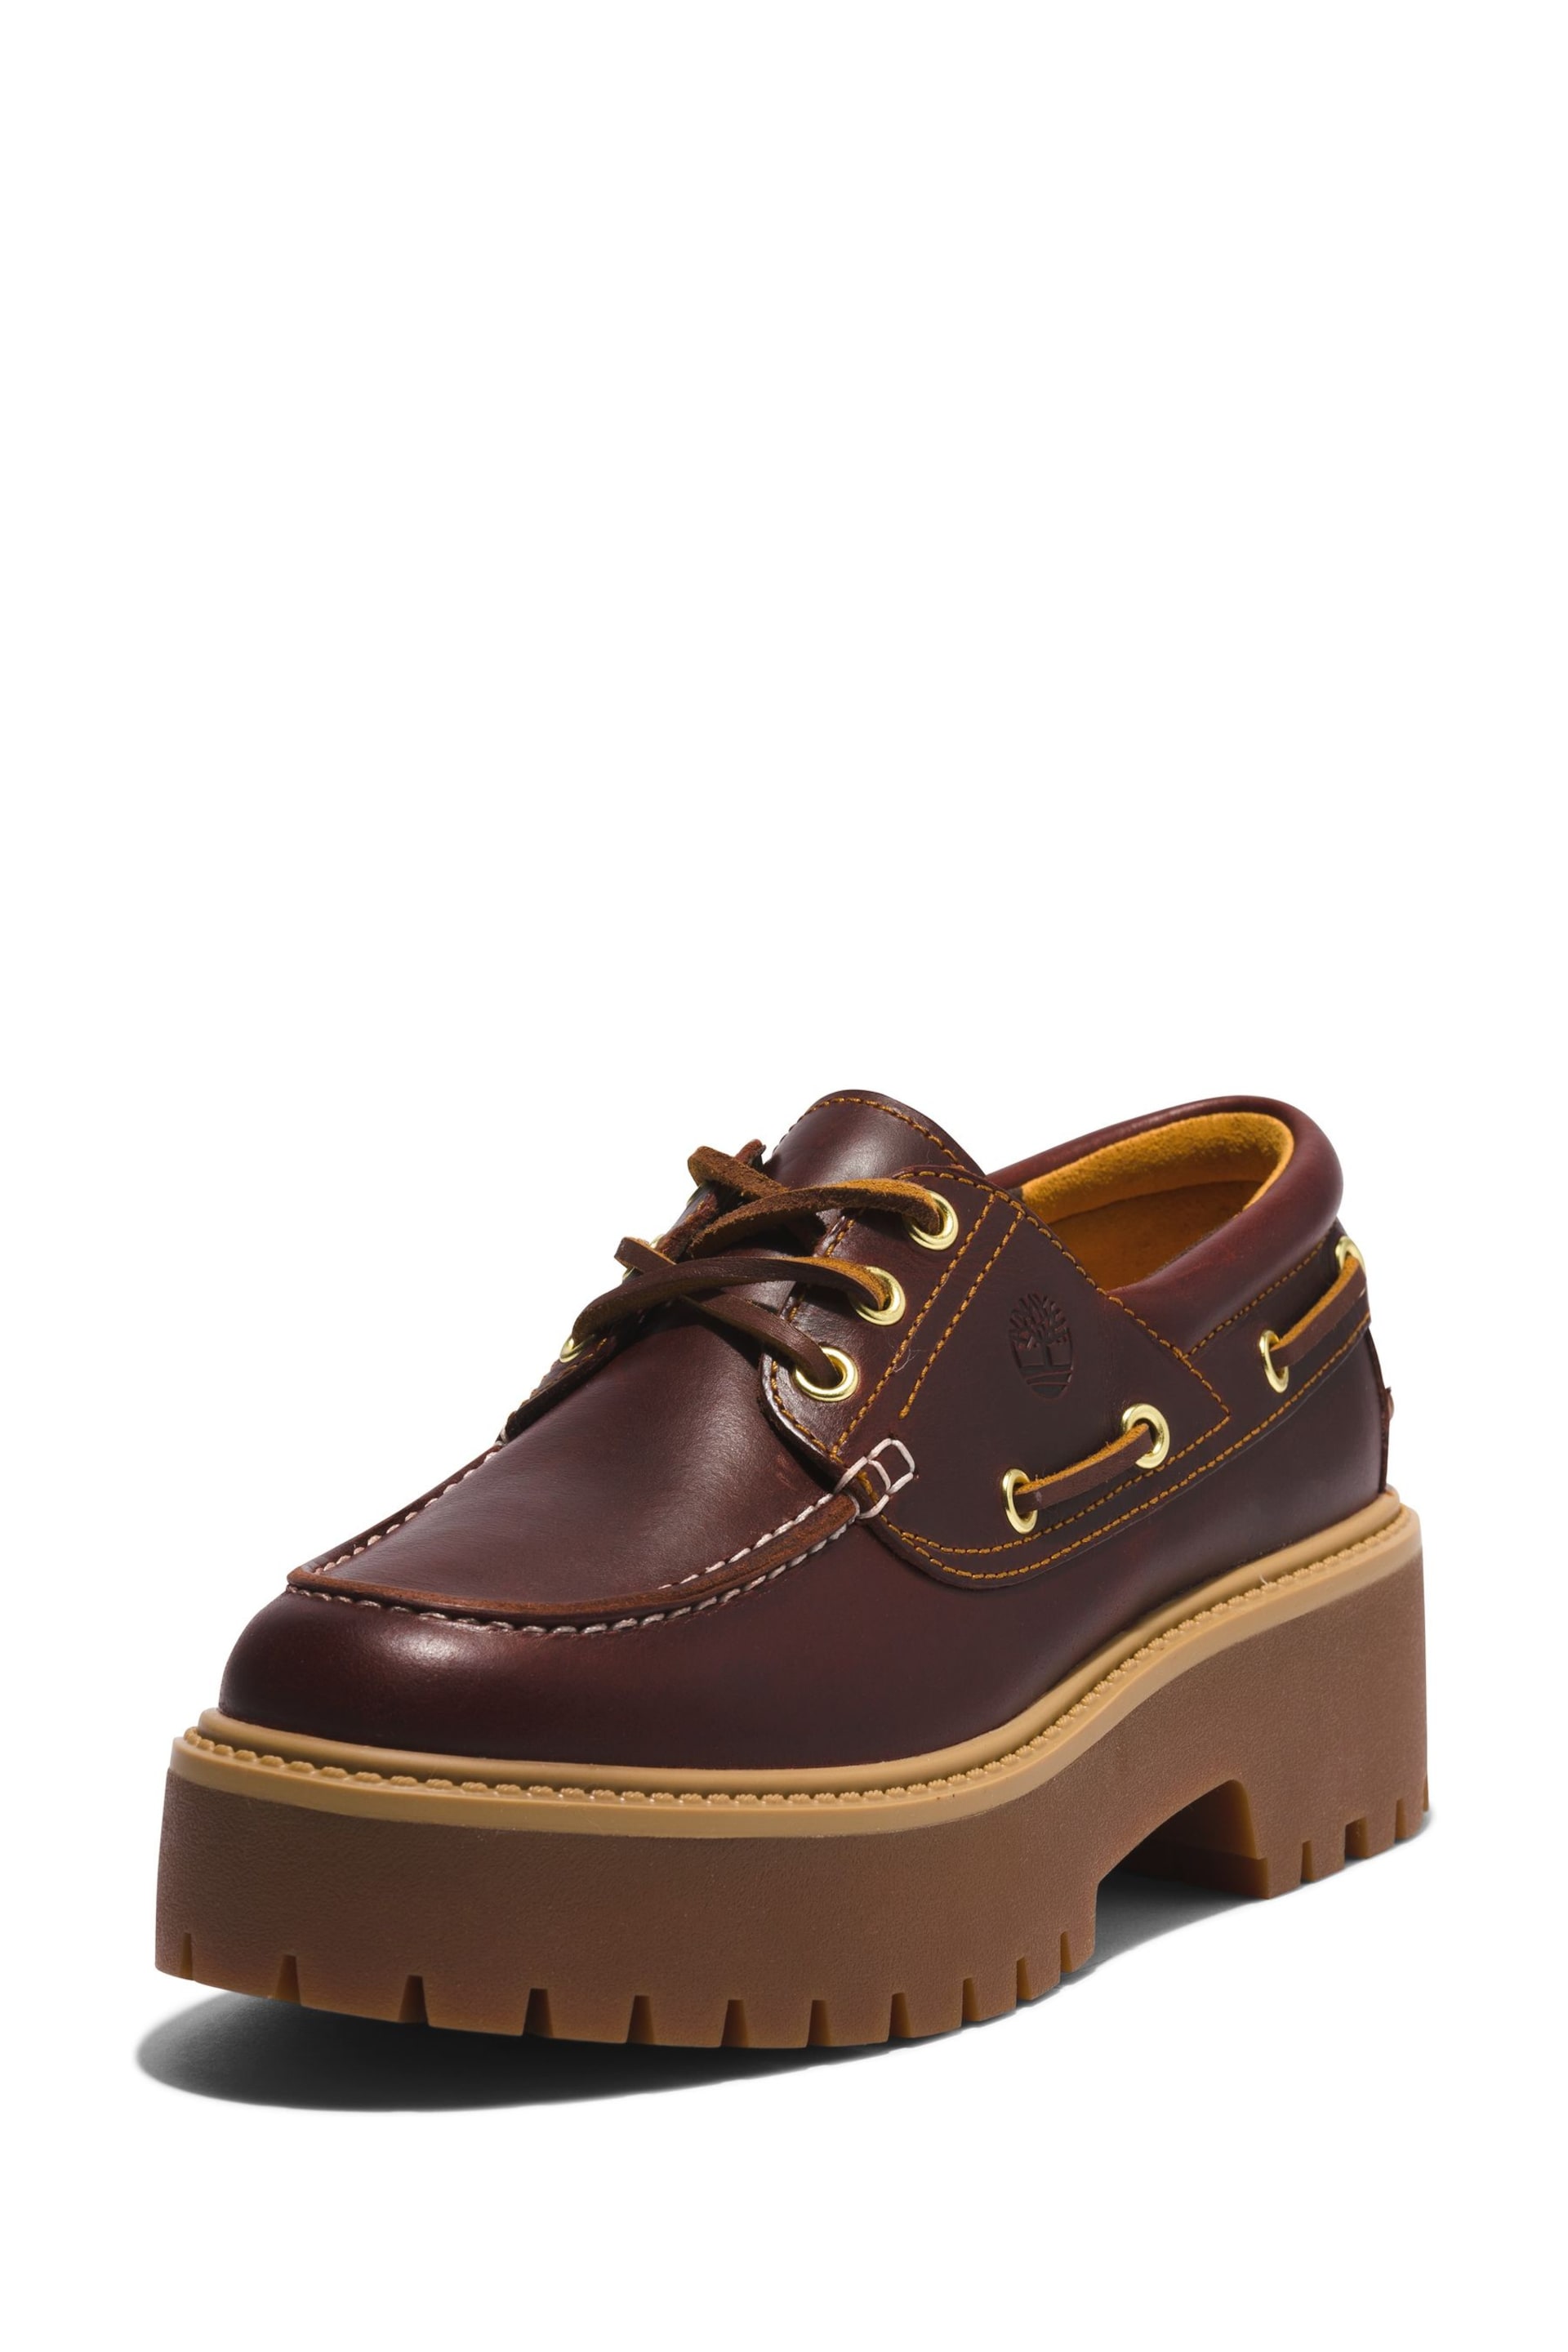 Timberland Street Boat Brown Shoes - Image 3 of 7